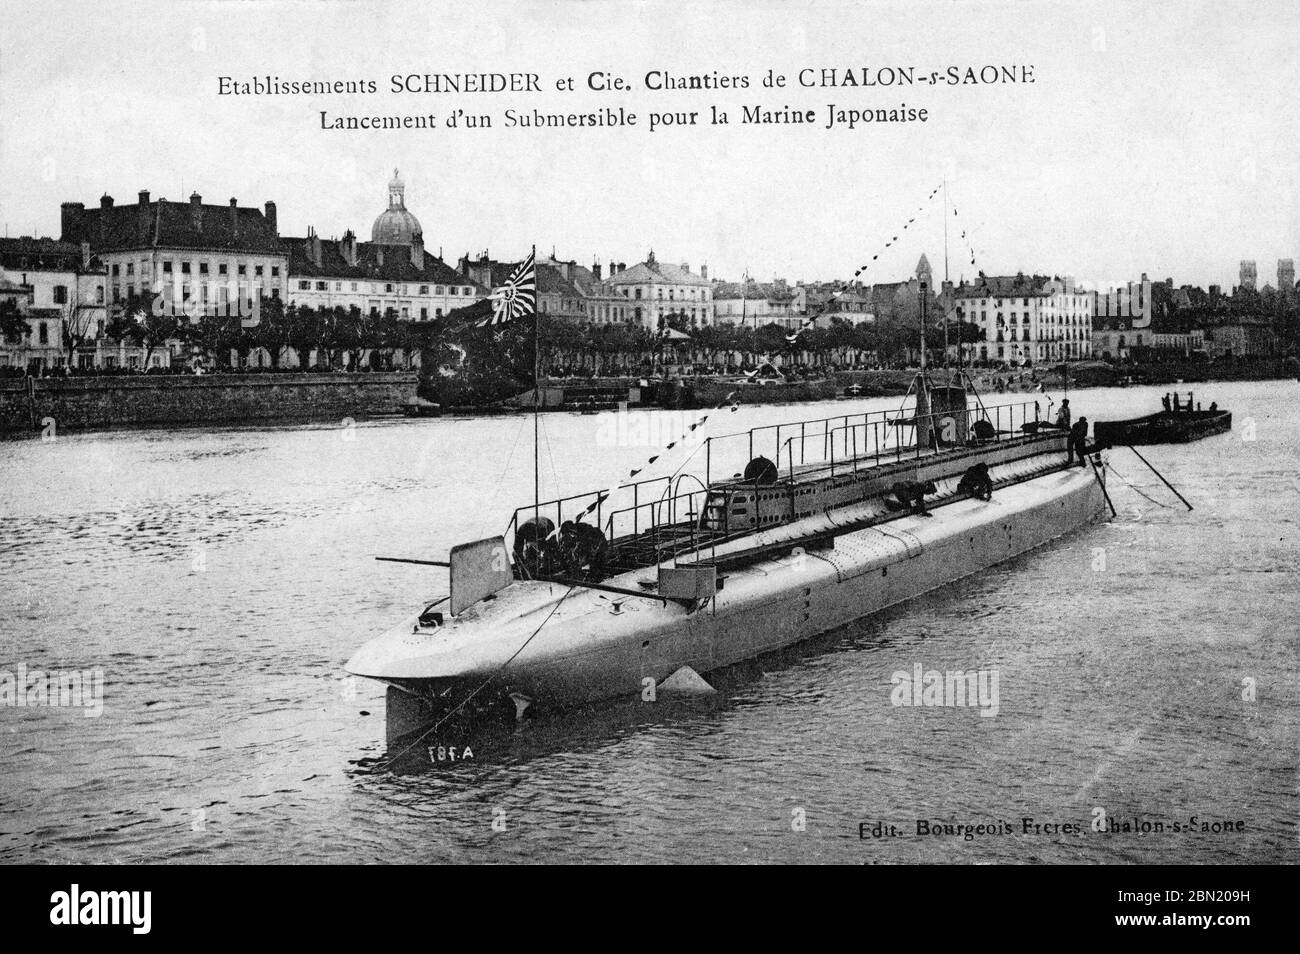 [ 1910s France - Japanese Submarine ] —   A submarine constructed for the Imperial Japanese Navy by the French steel-making, armaments and locomotive manufacturer Schneider & Cie just after being launched at the company’s dockyards in Chalon-sur-Saône in eastern France.  Photography by Bourgeois Frêres.  Original text: Lancement d'un Submersible pour la Marine Japonaise  20th century vintage postcard. Stock Photo